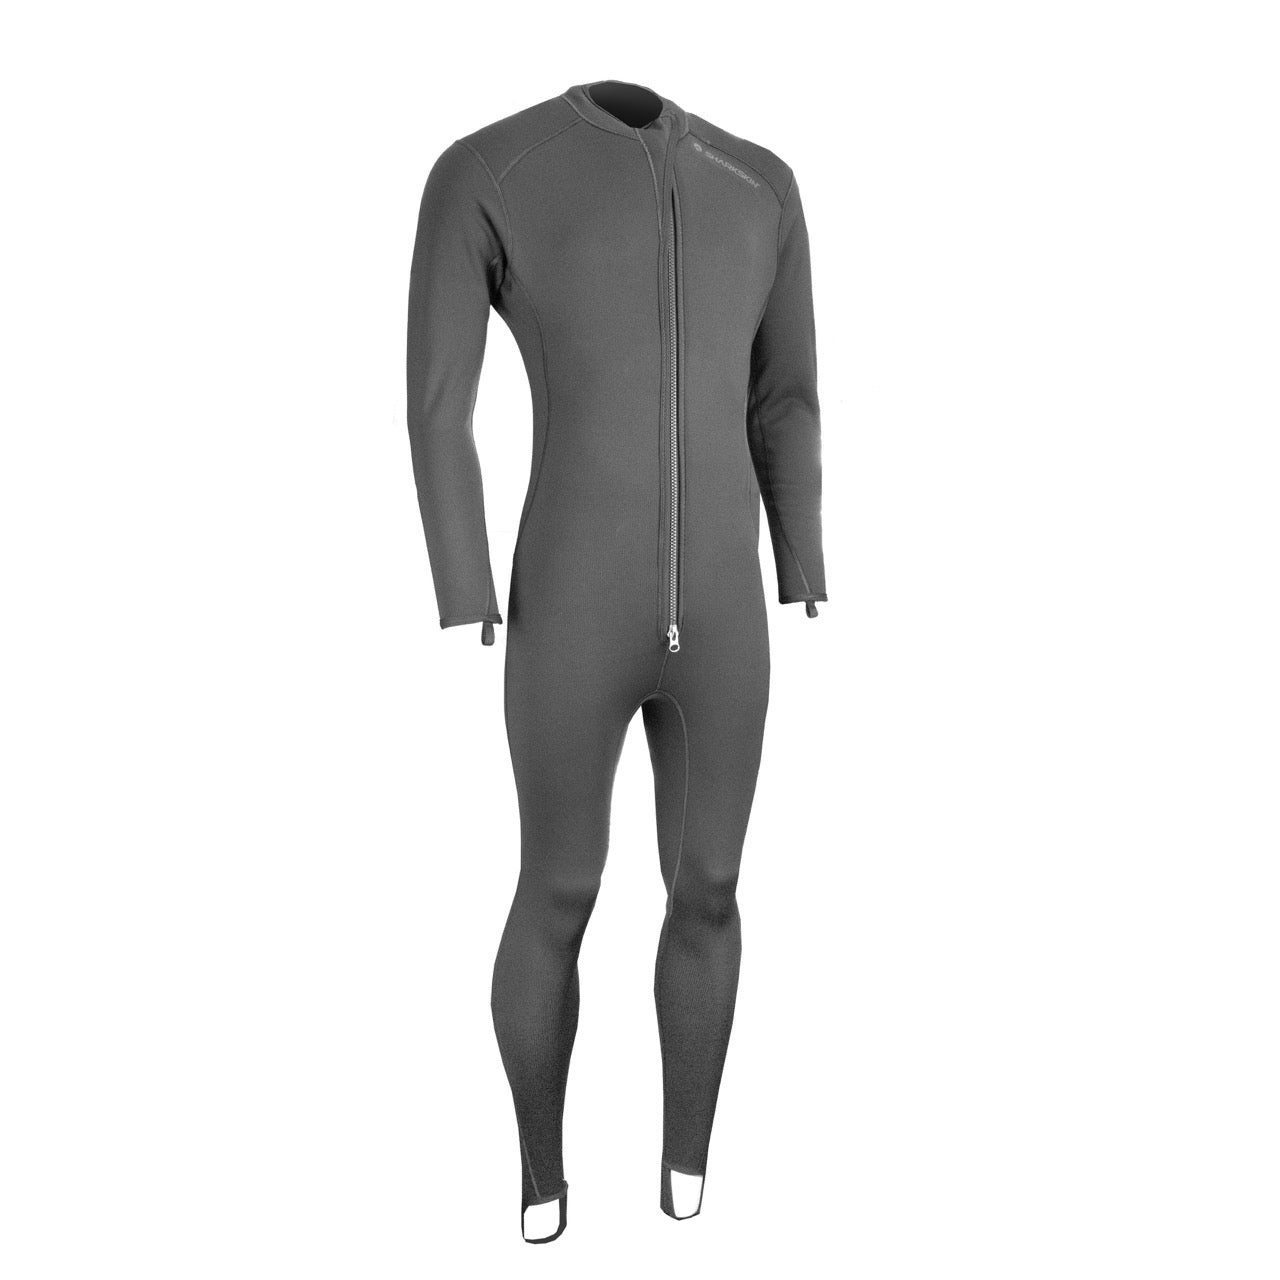 T2 CHILLPROOF UNDERGARMENT F/Z MENS